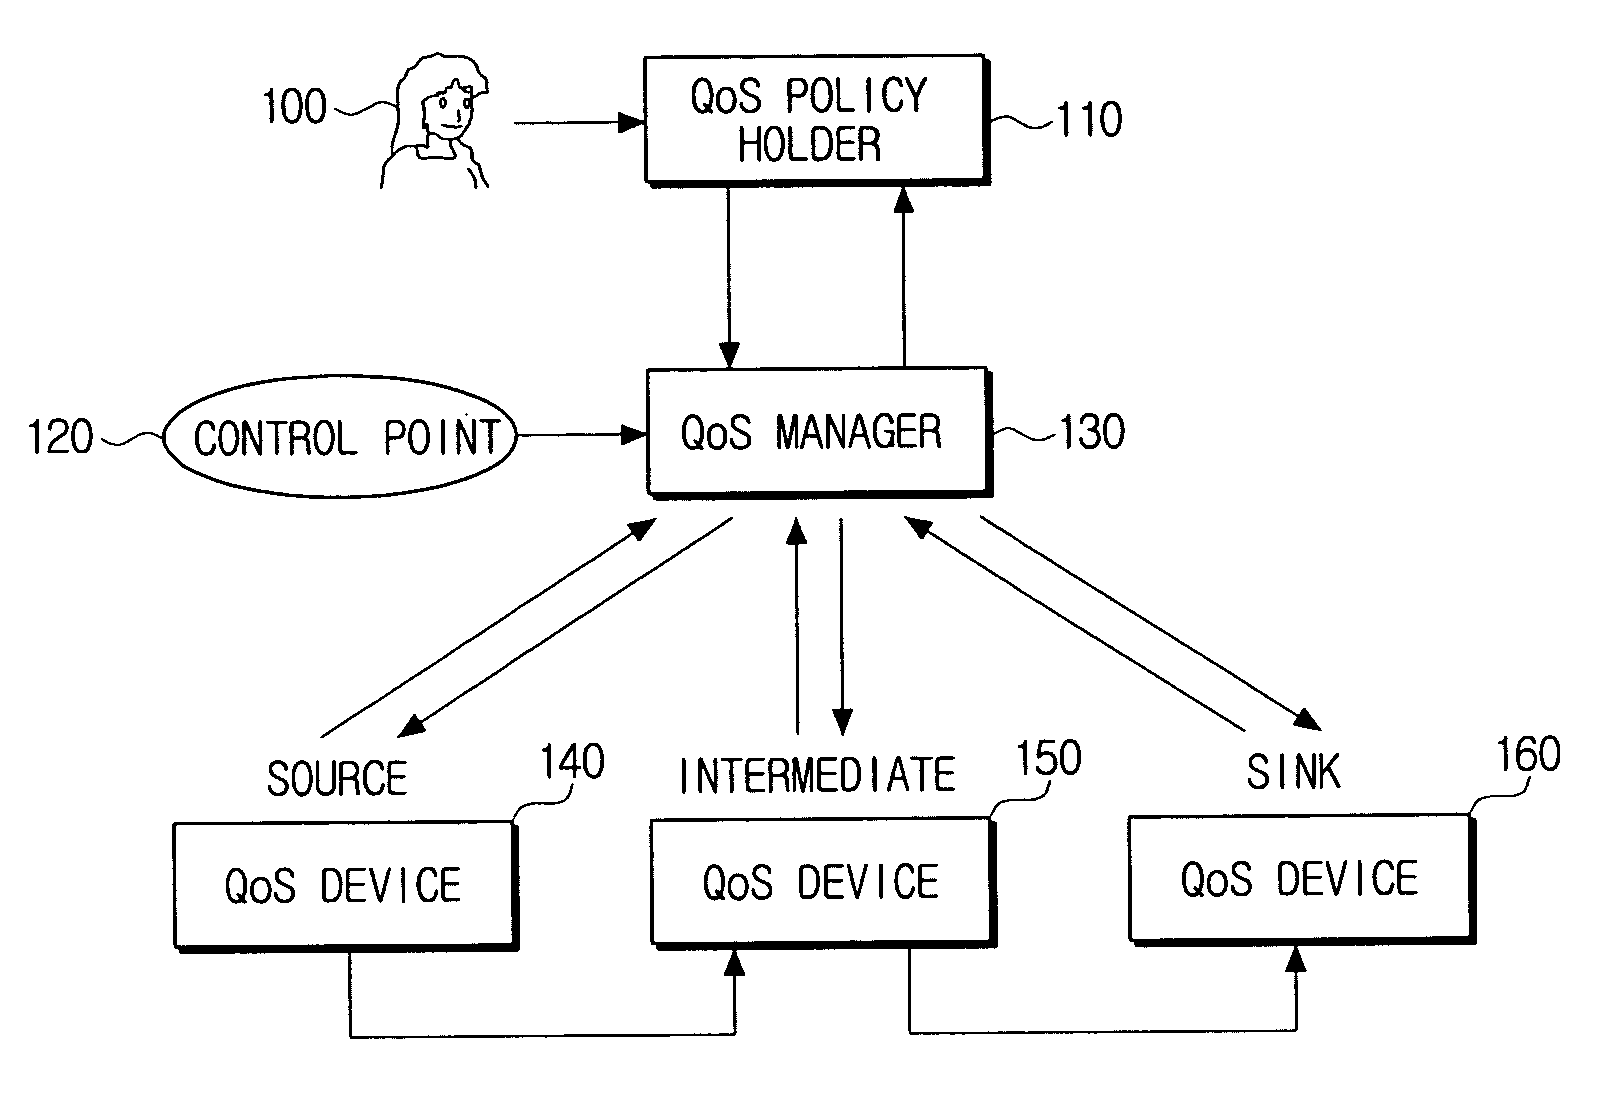 Streaming service providing method adaptive to dynamic network changes